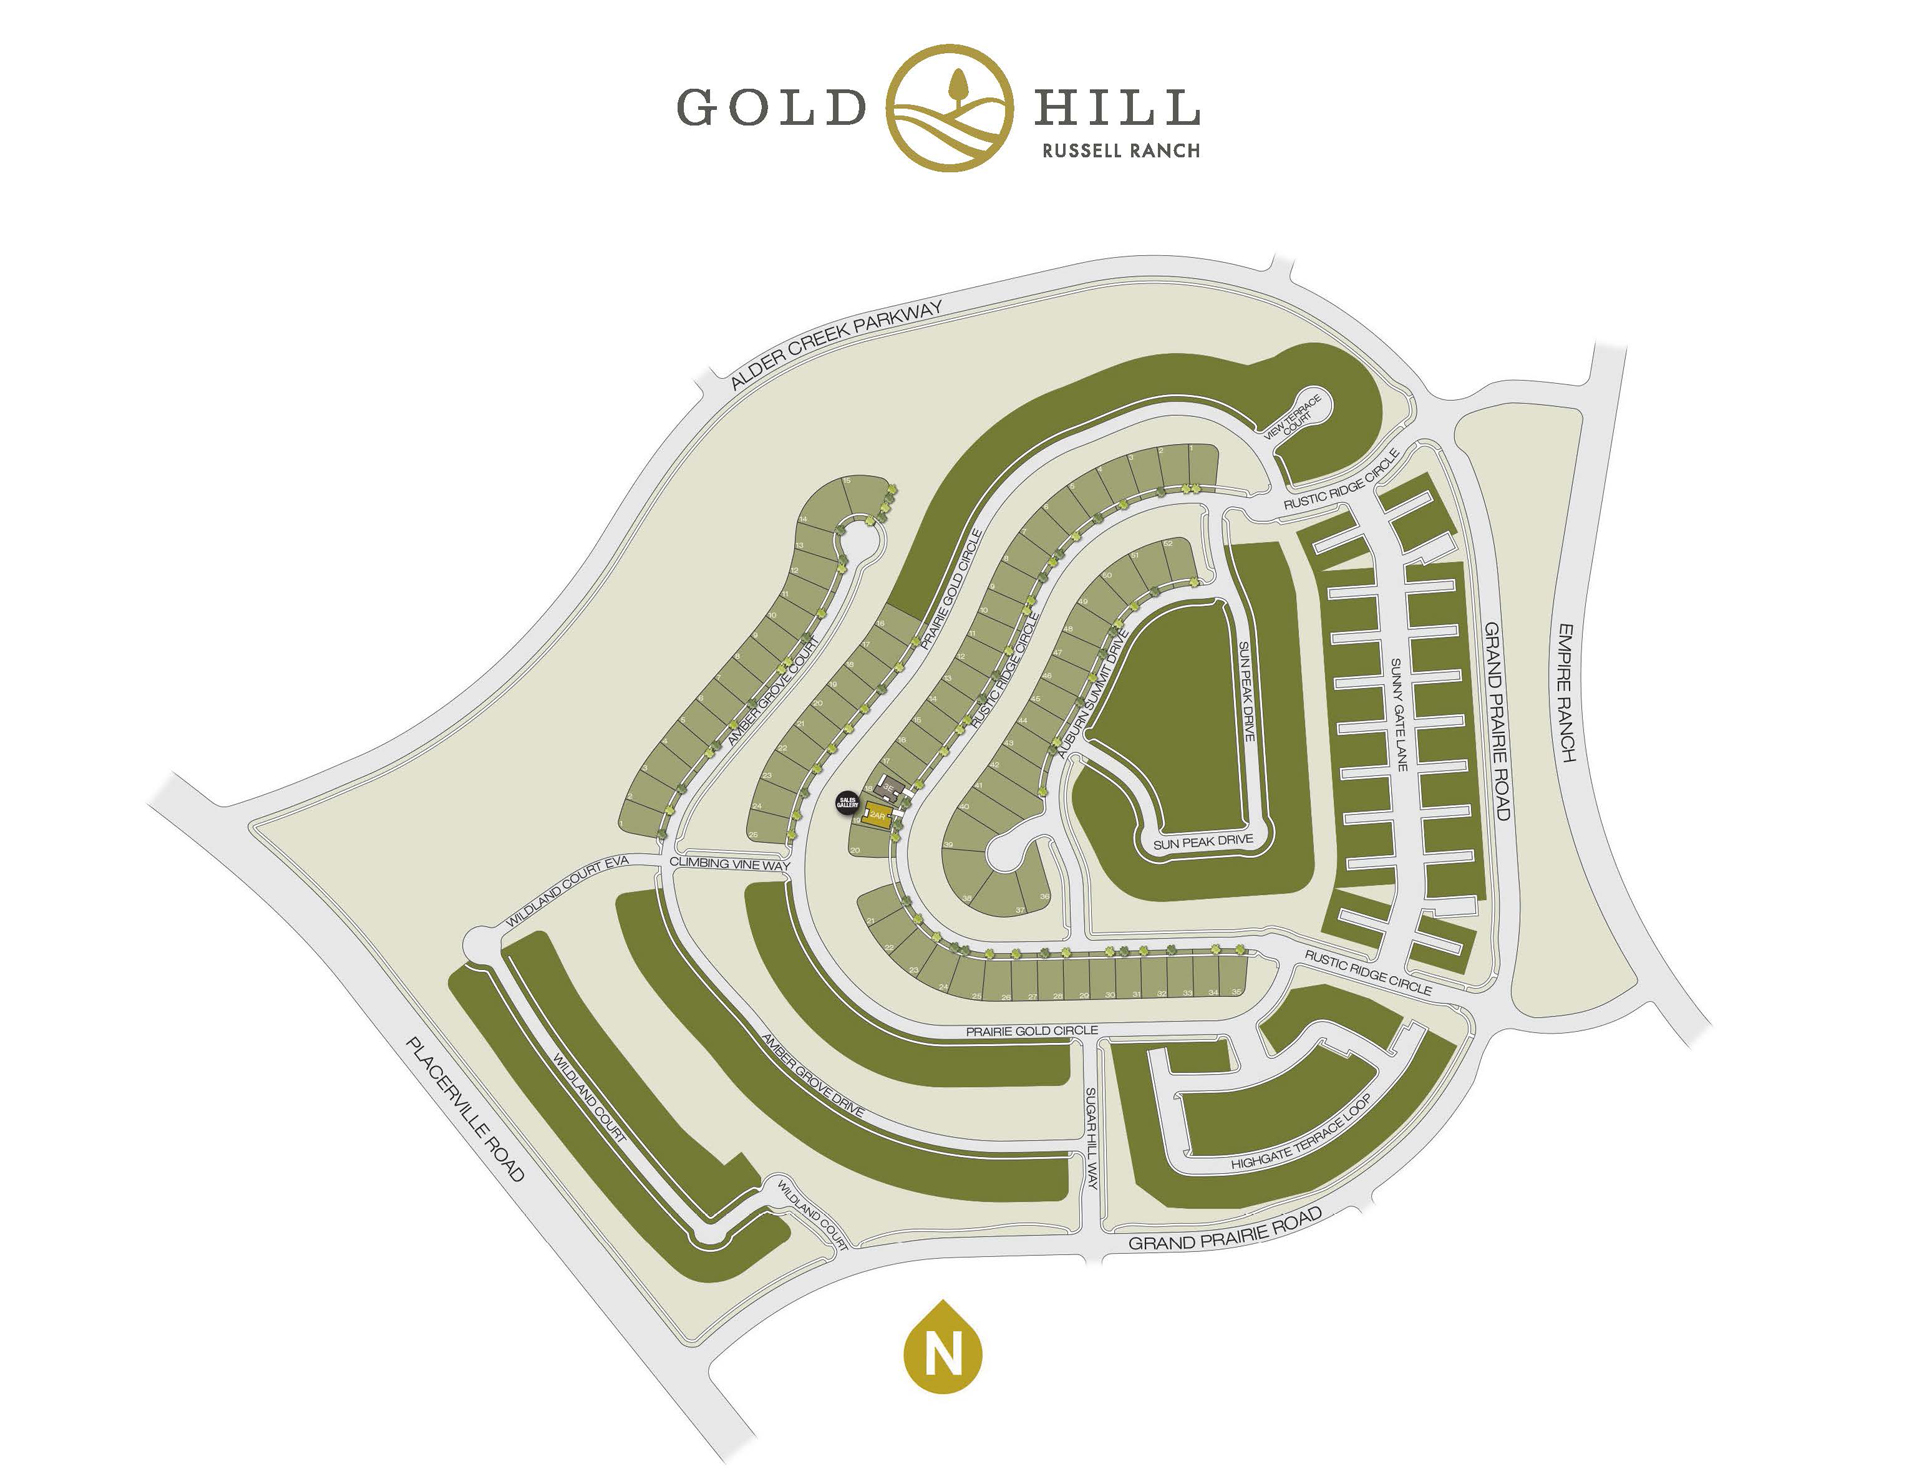 Gold Hill Site Plan